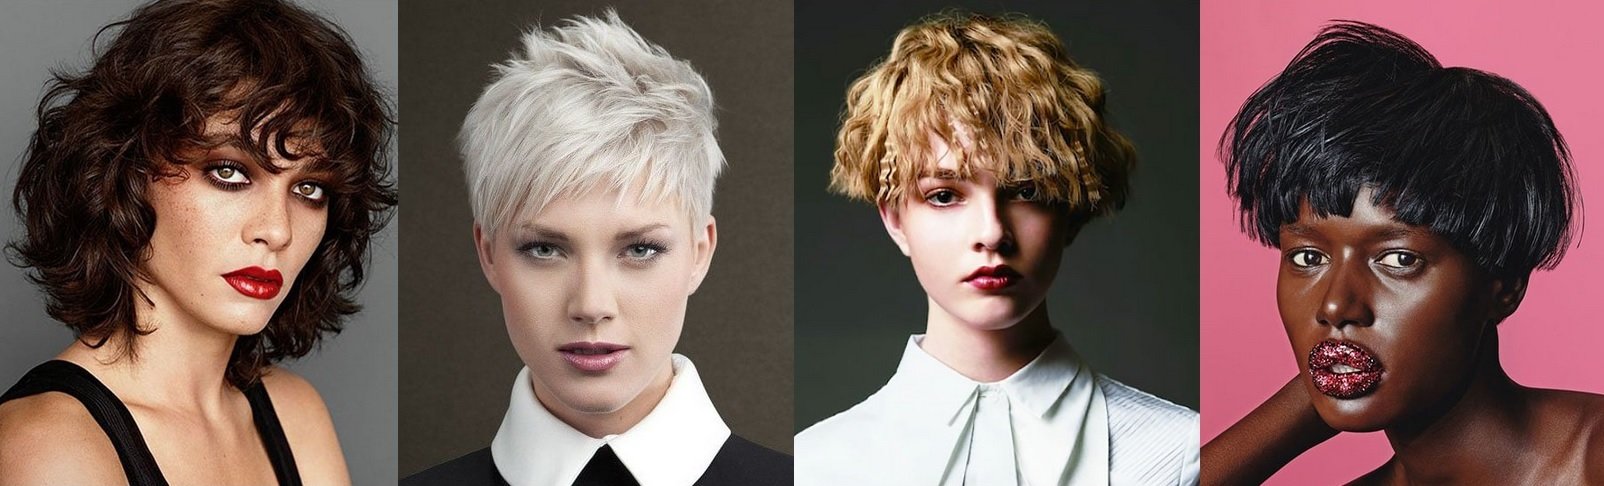 30 Best Short Hairstyles & Haircuts for Women